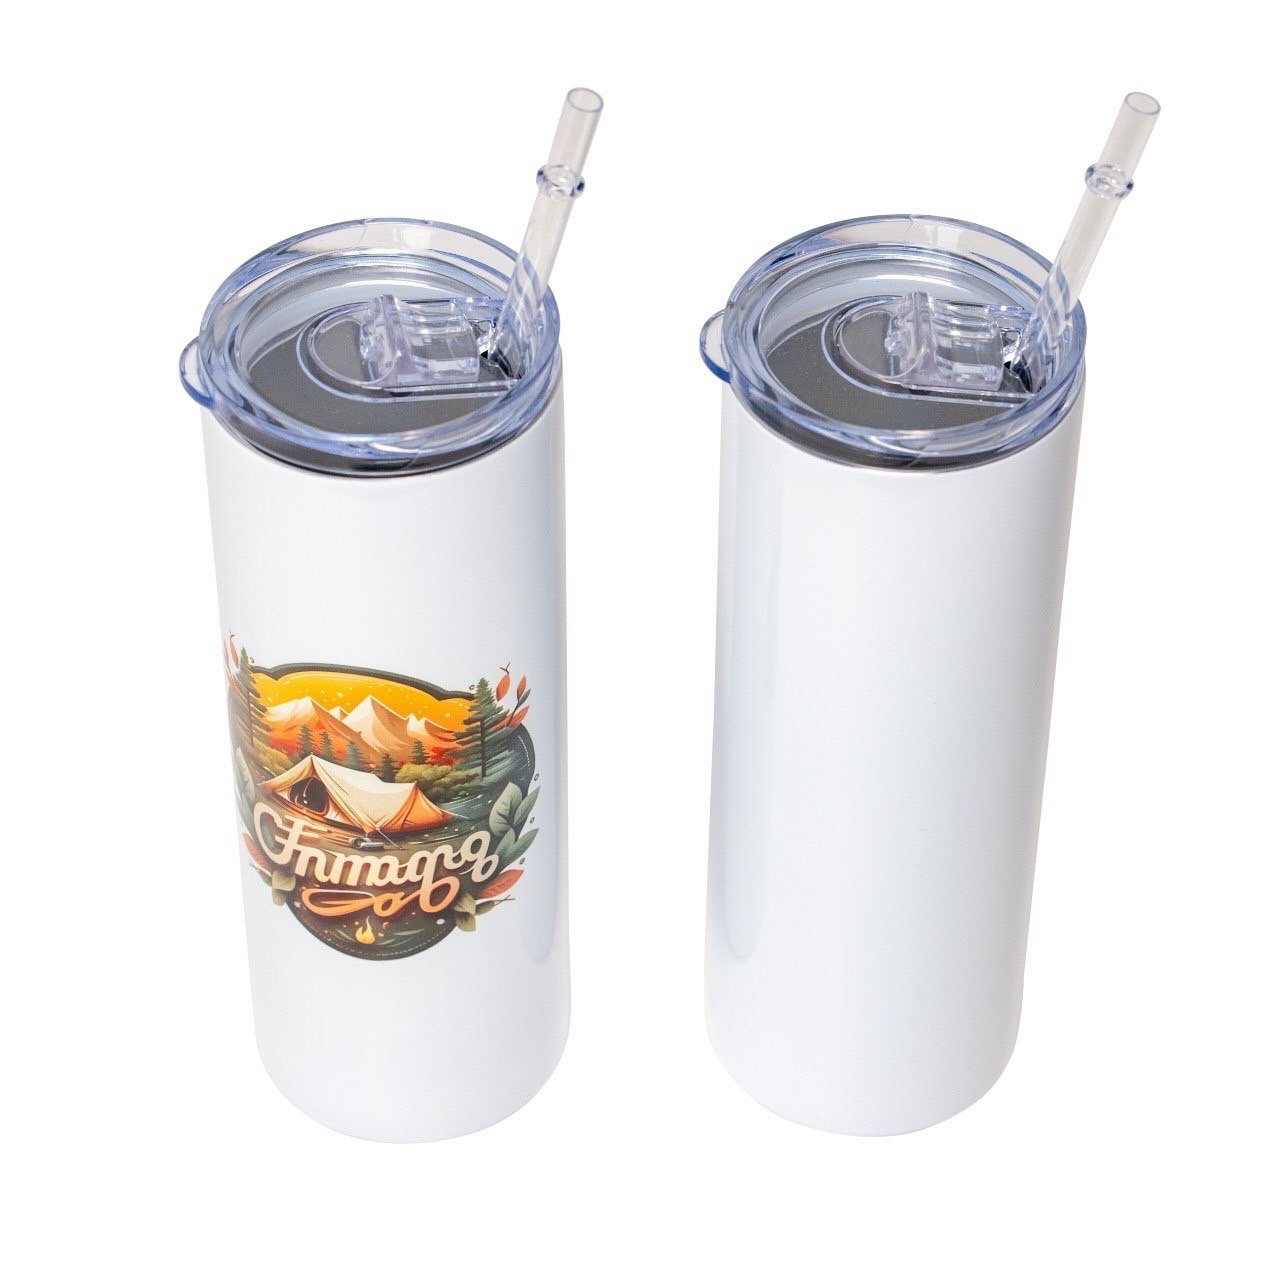 20oz straight stainless steel straw cup02